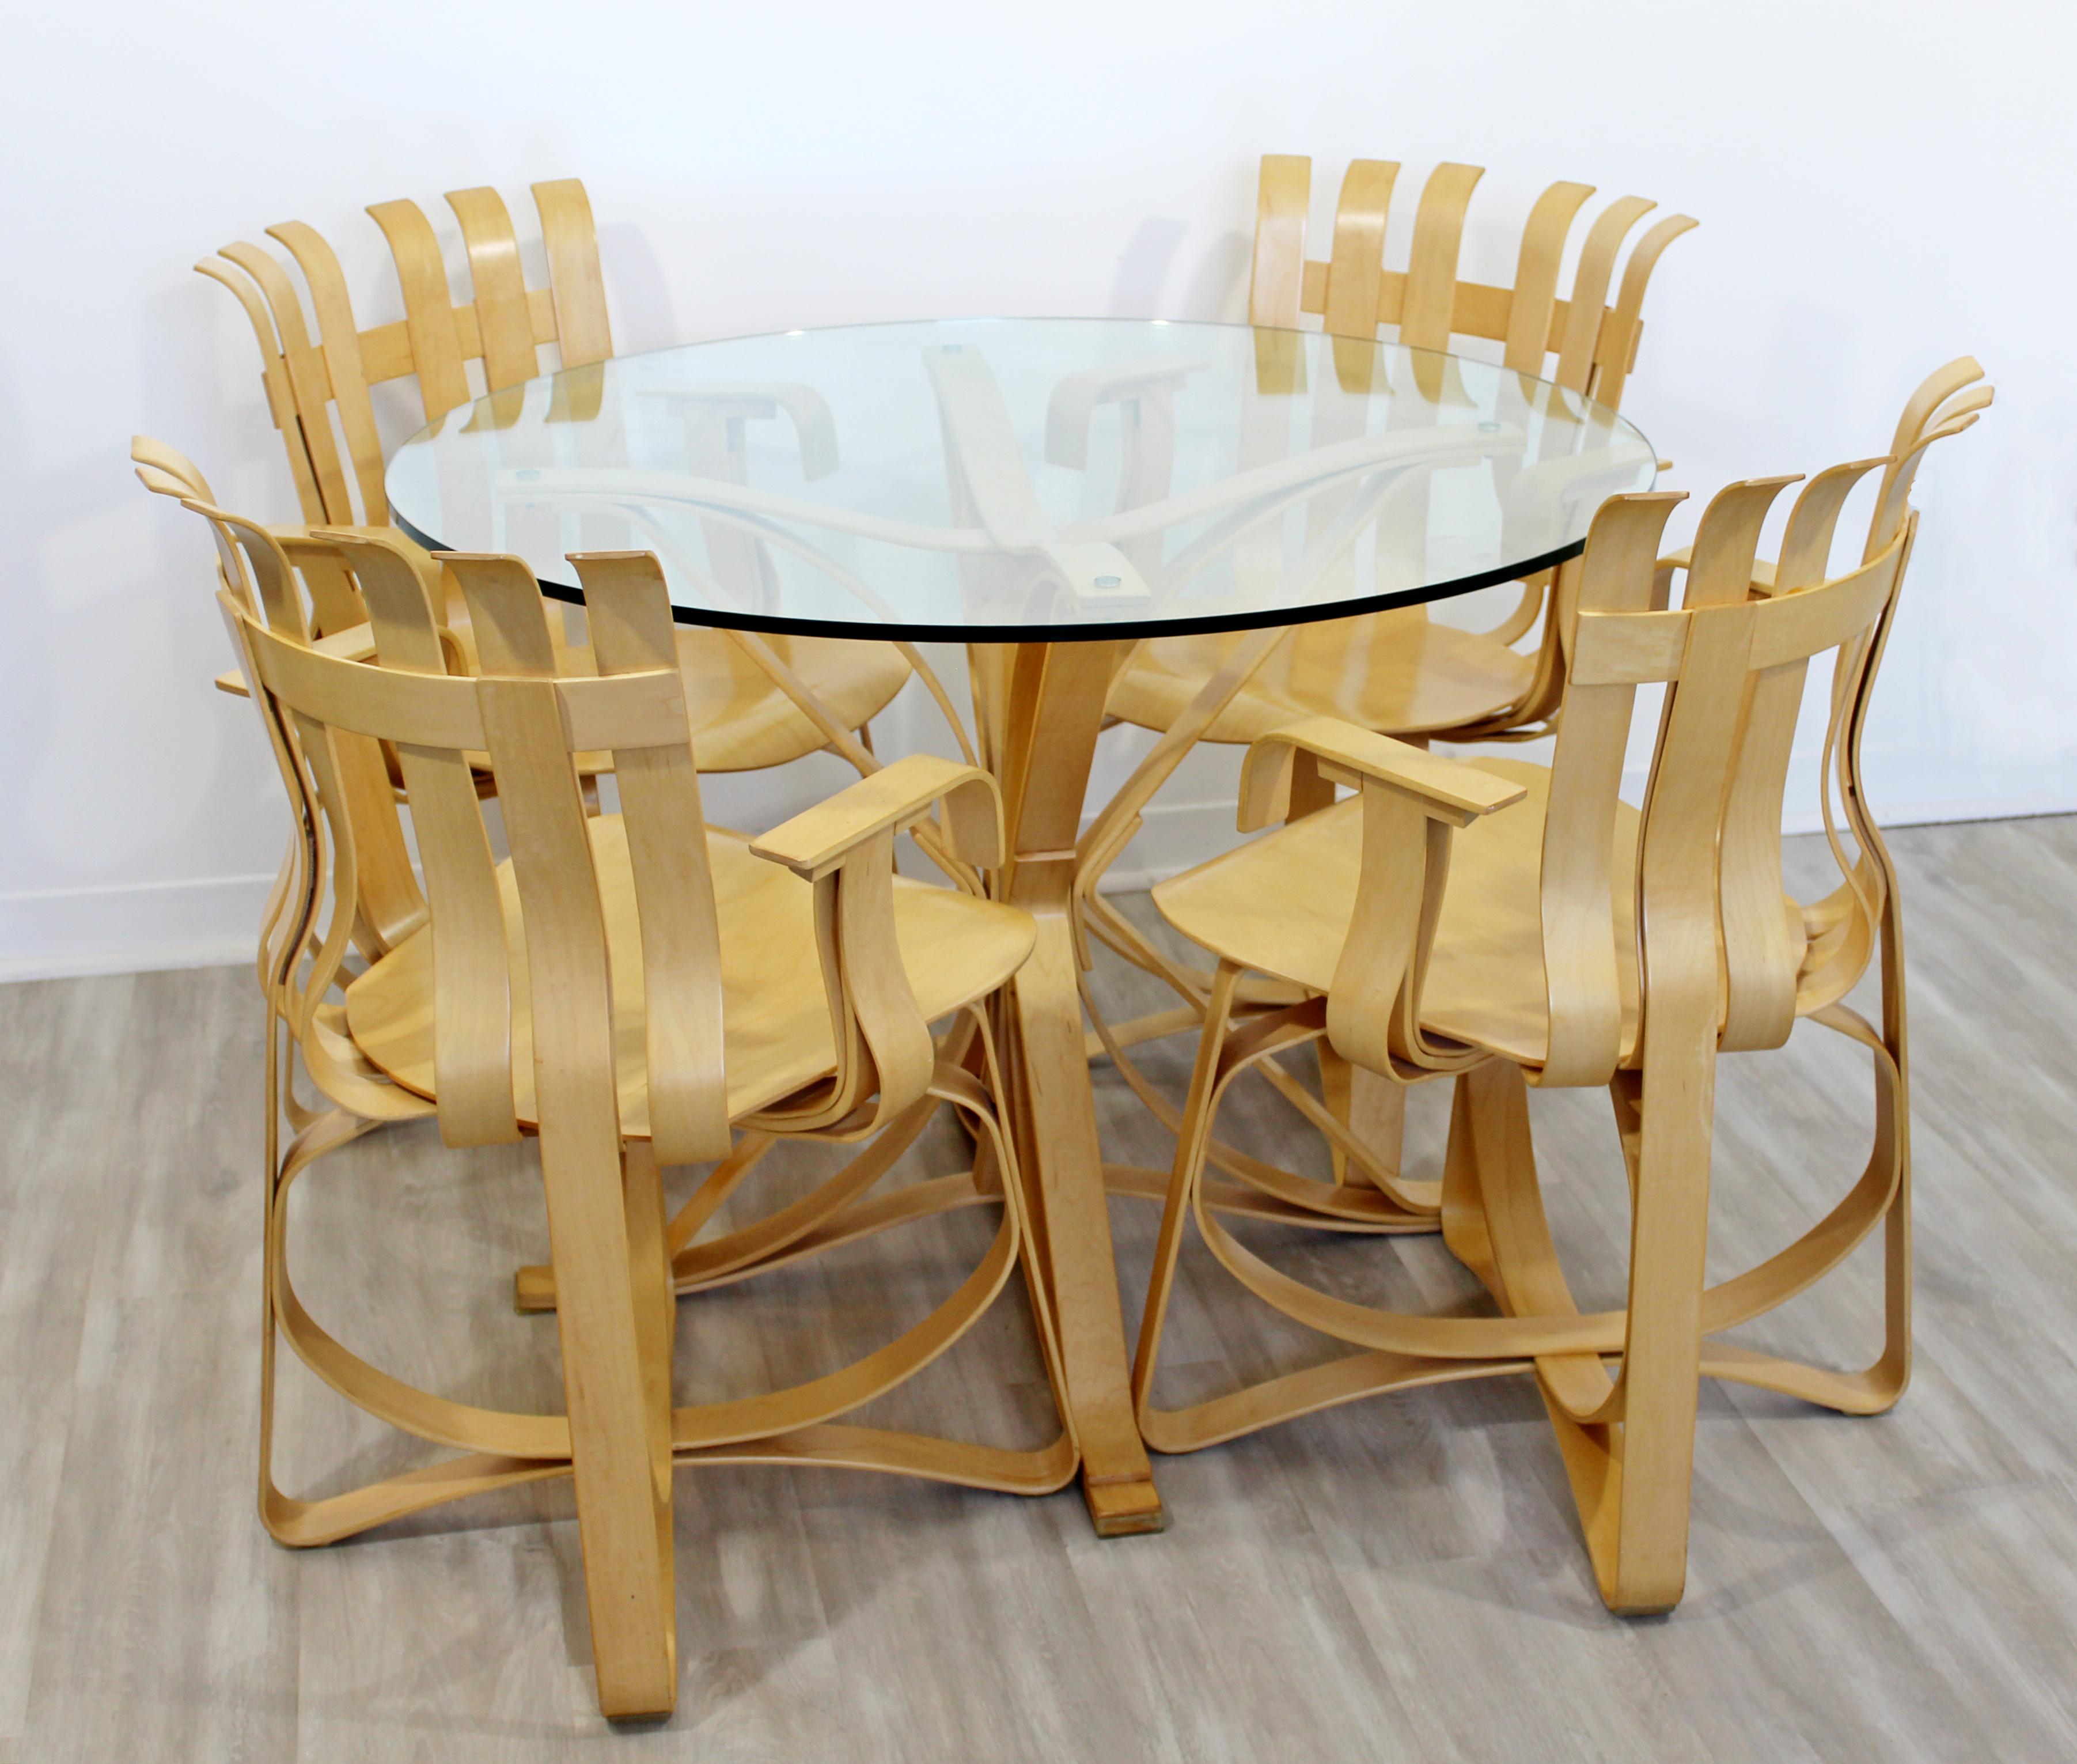 American Contemporary Modernist Frank Gehry Knoll Face Off Dinette Table Hat Trick Chairs